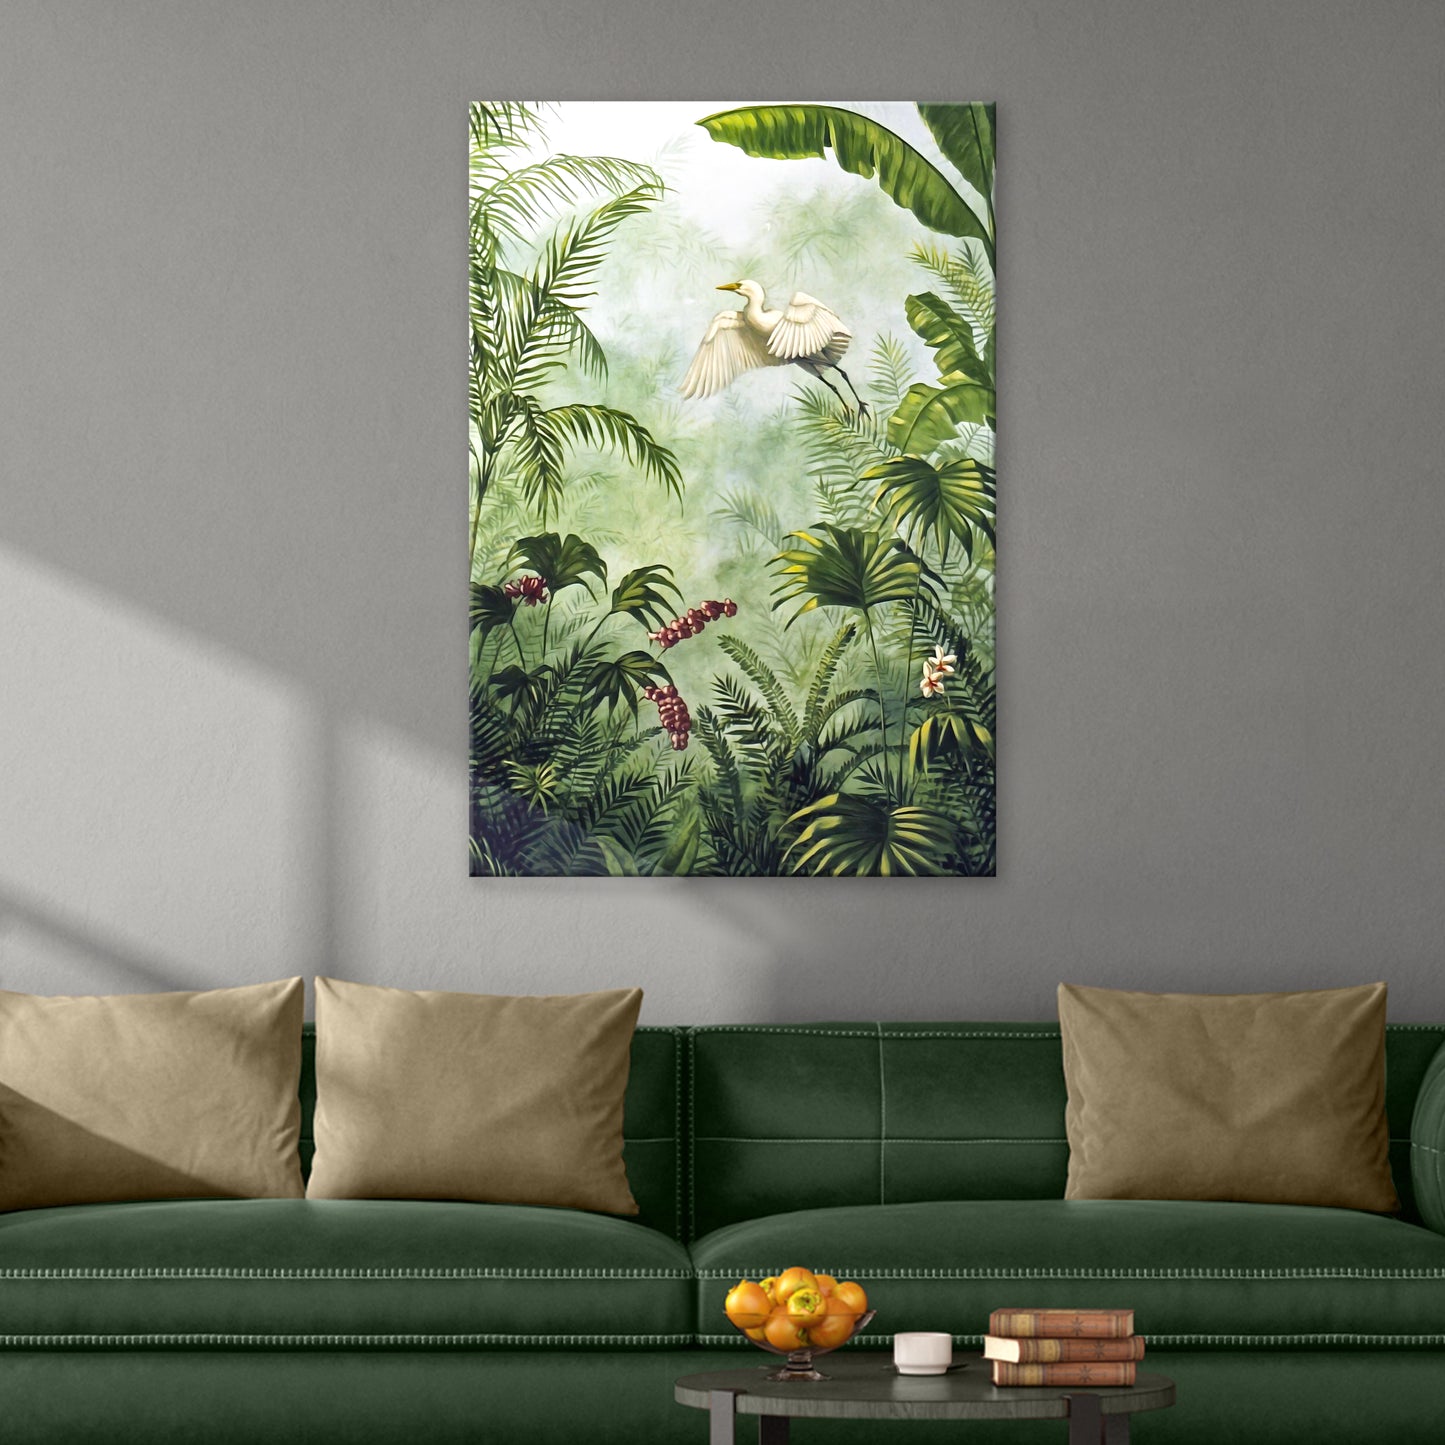 Tropical Rainforest Plants Canvas Wall Art Style 2 - Image by Tailored Canvases